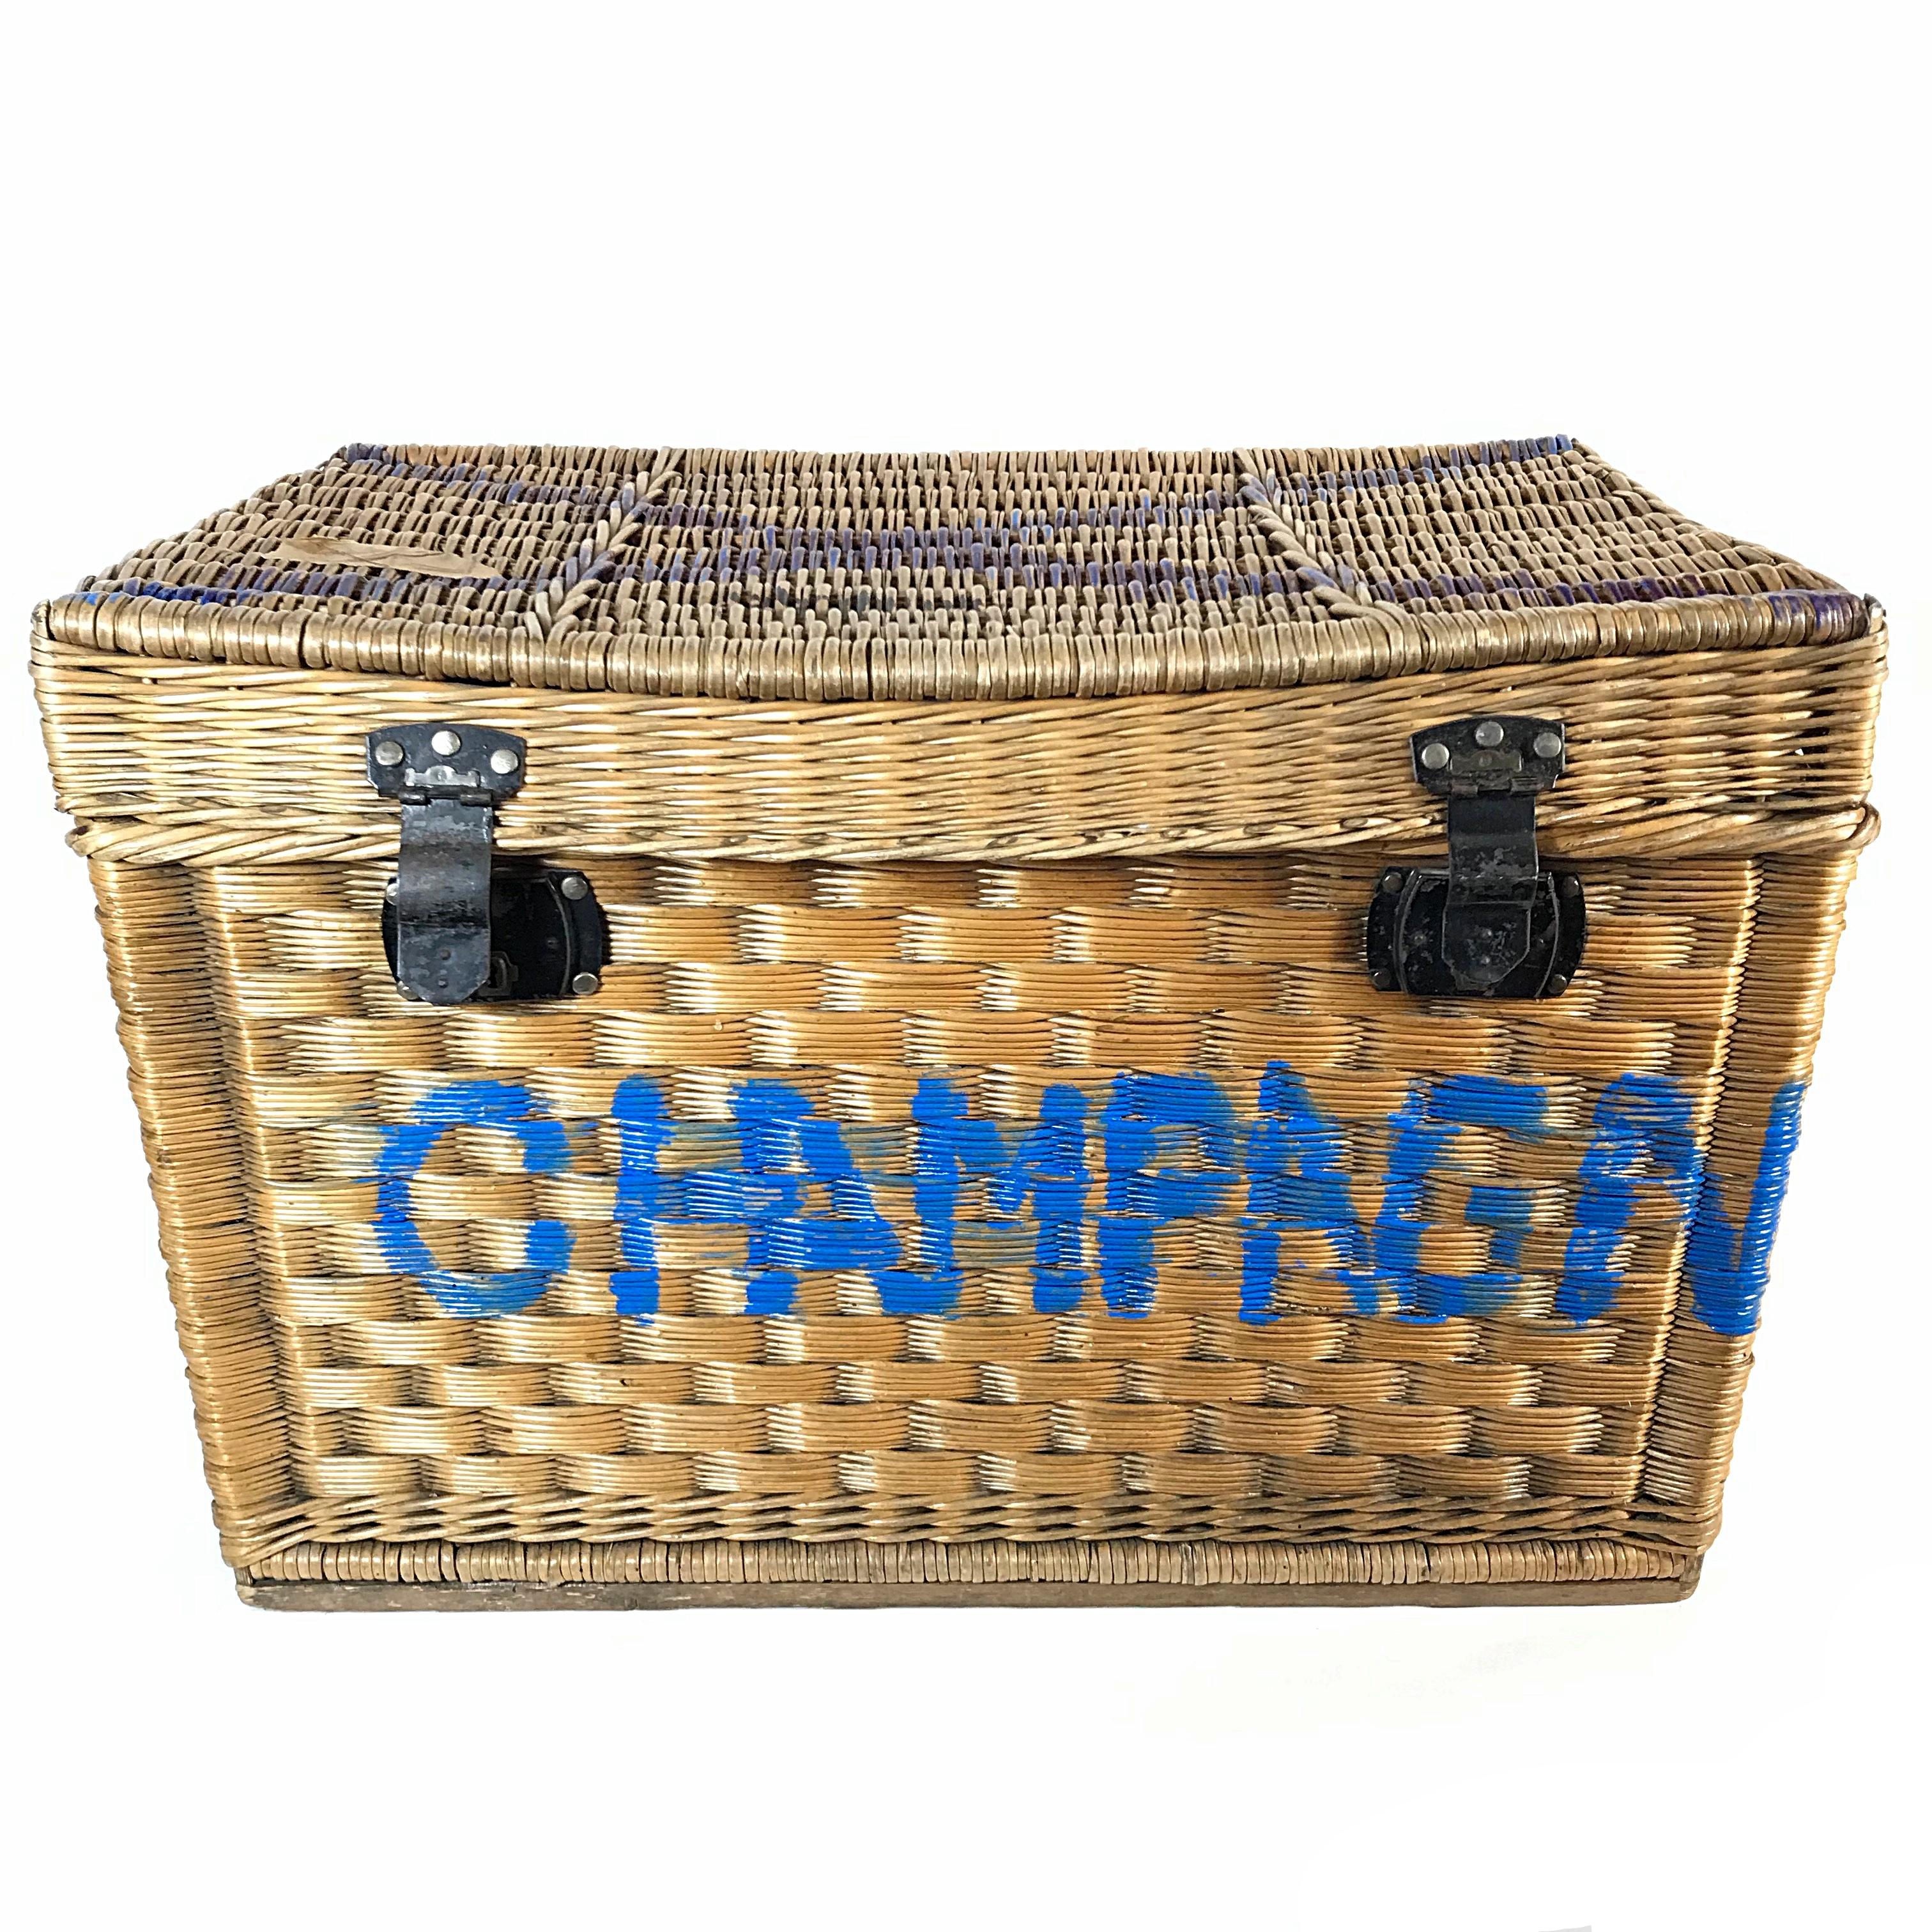 Early unique wicker trunk handmade in France in 1910s. The woven willow wicker trunk has a lid with two locks and two handles. The trunk is in very good condition with nice patina. It was used as a champagne bottle chest.

Measures: 
H 59 cm /